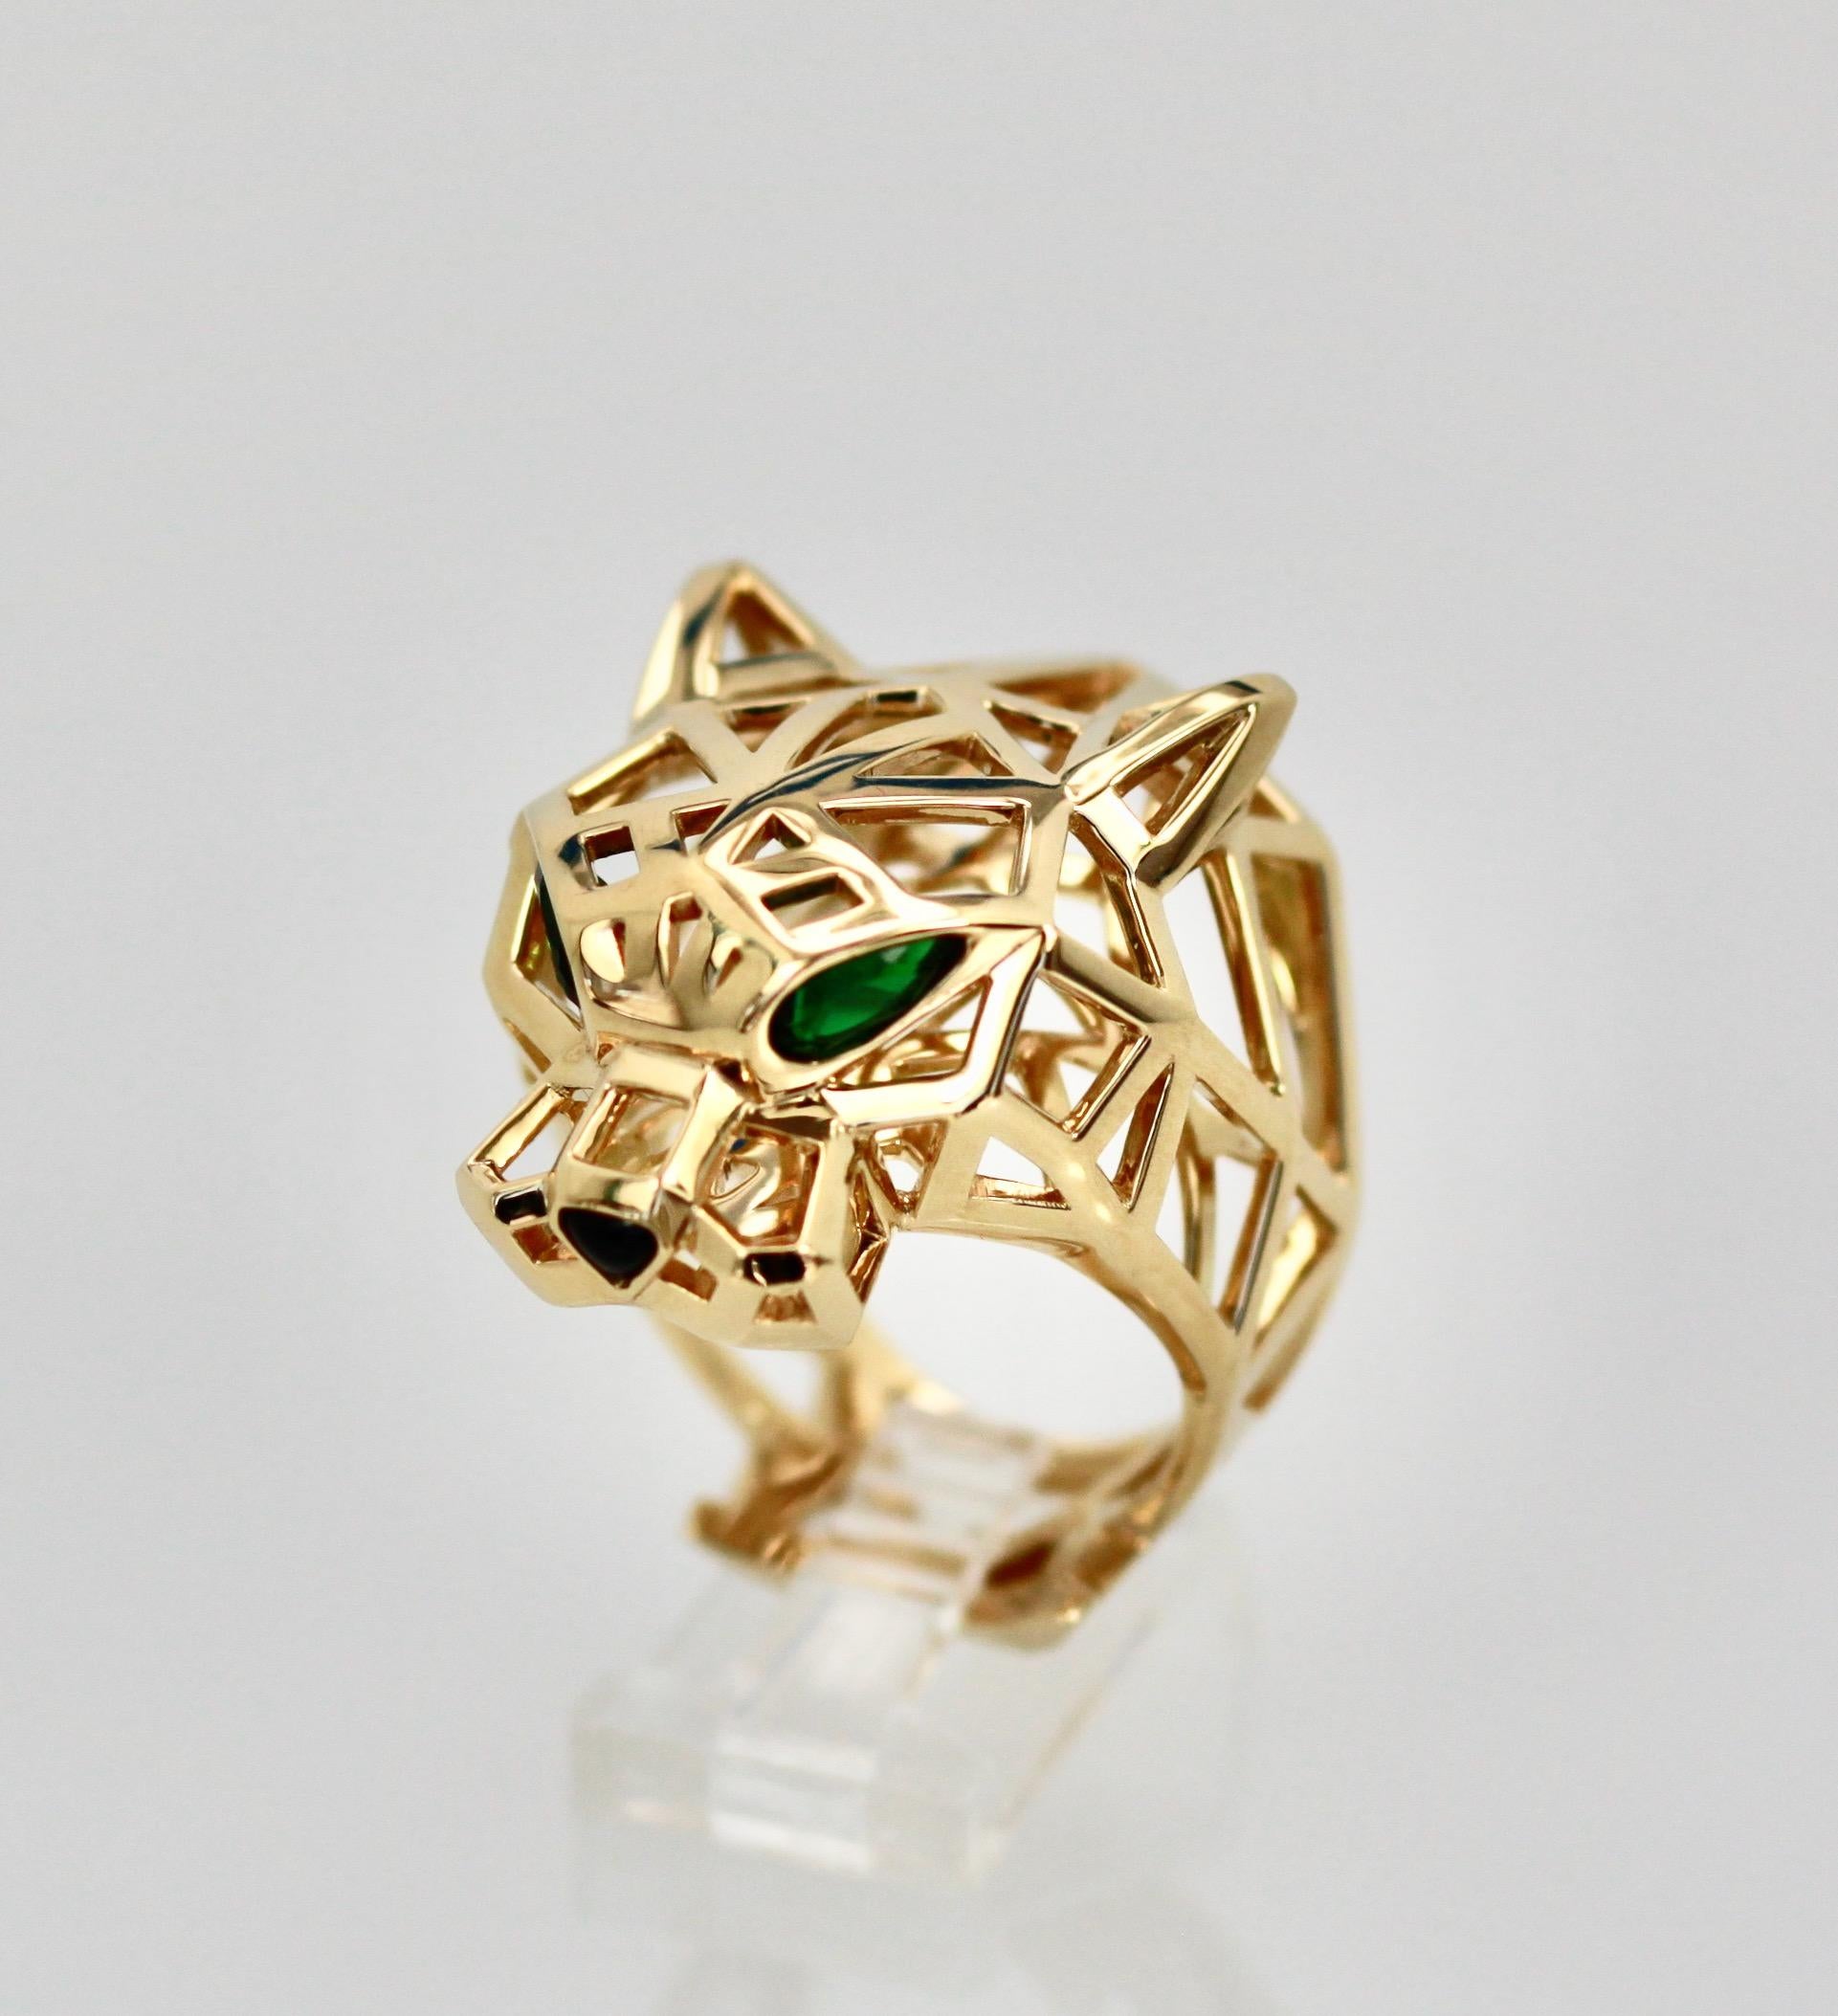 This classic Panthere ring is open with a pyramid shape and has Emerald eyes and Onyx nose.  Retail $20,800. Size French 68 US 12.  Comes in Cartier travel pouch